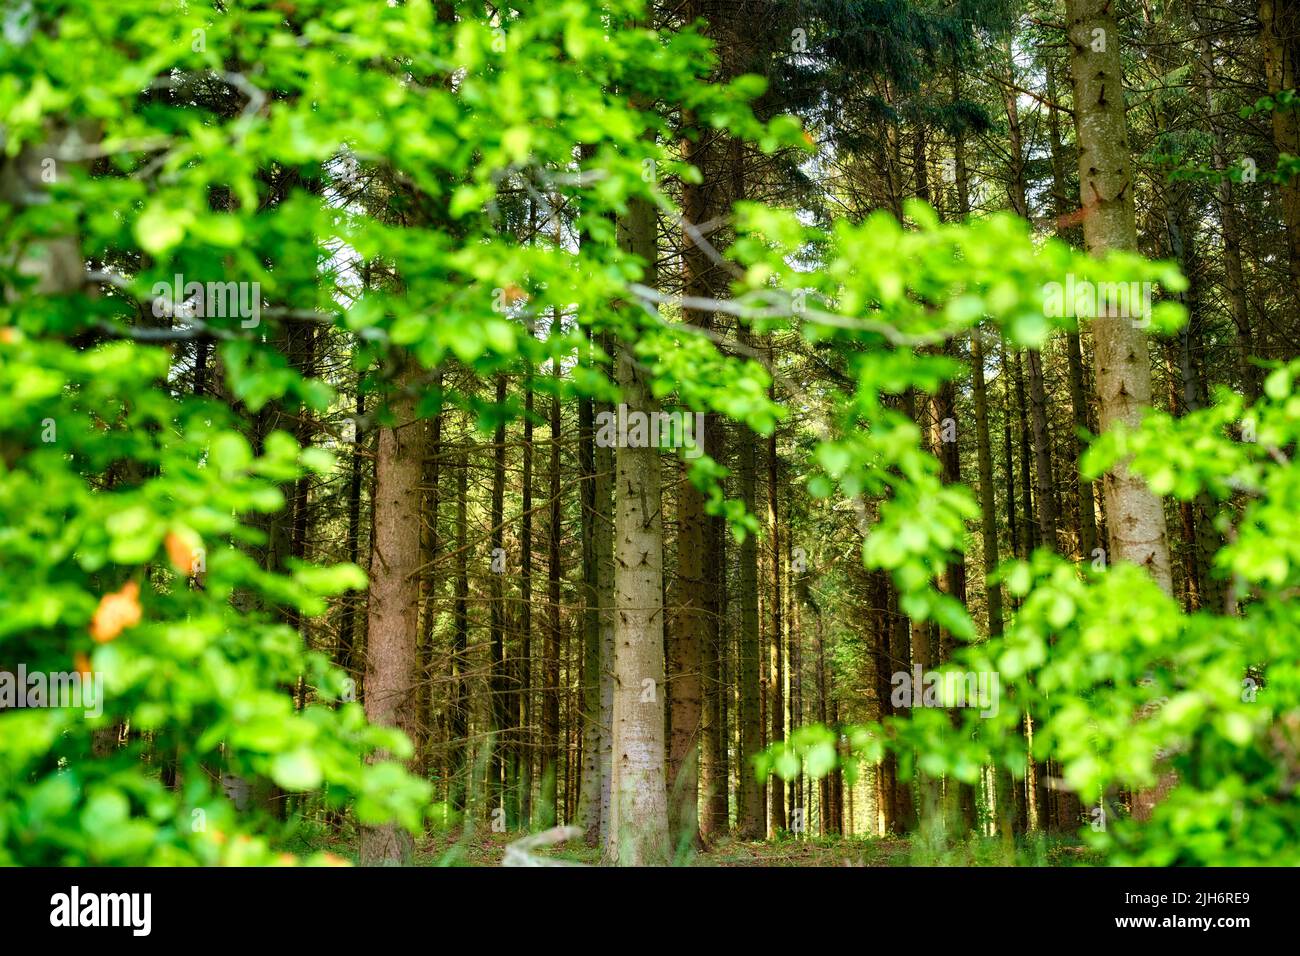 Wild trees growing in a forest with green plants and bushes. Scenic landscape of tall wooden trunks with lush leaves in nature during spring. Peaceful Stock Photo